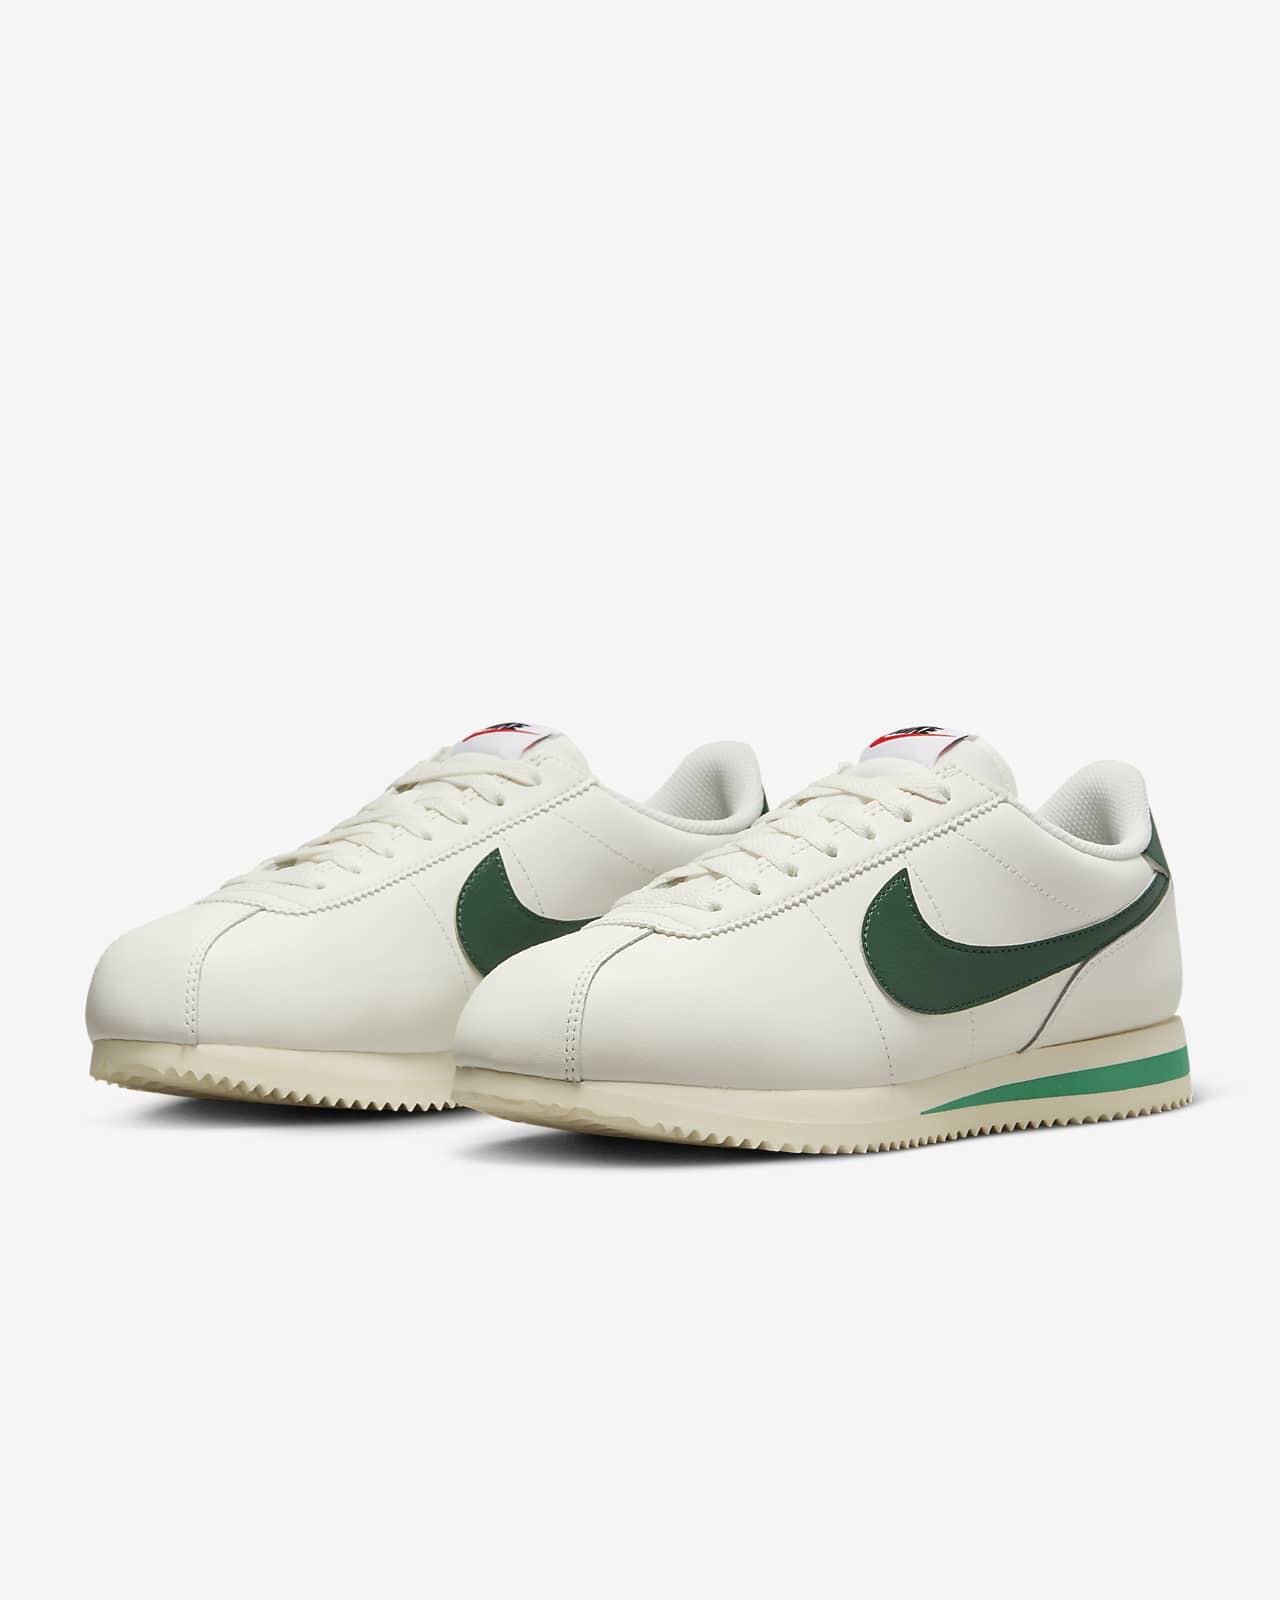 Nike Cortez sneakers in white and green